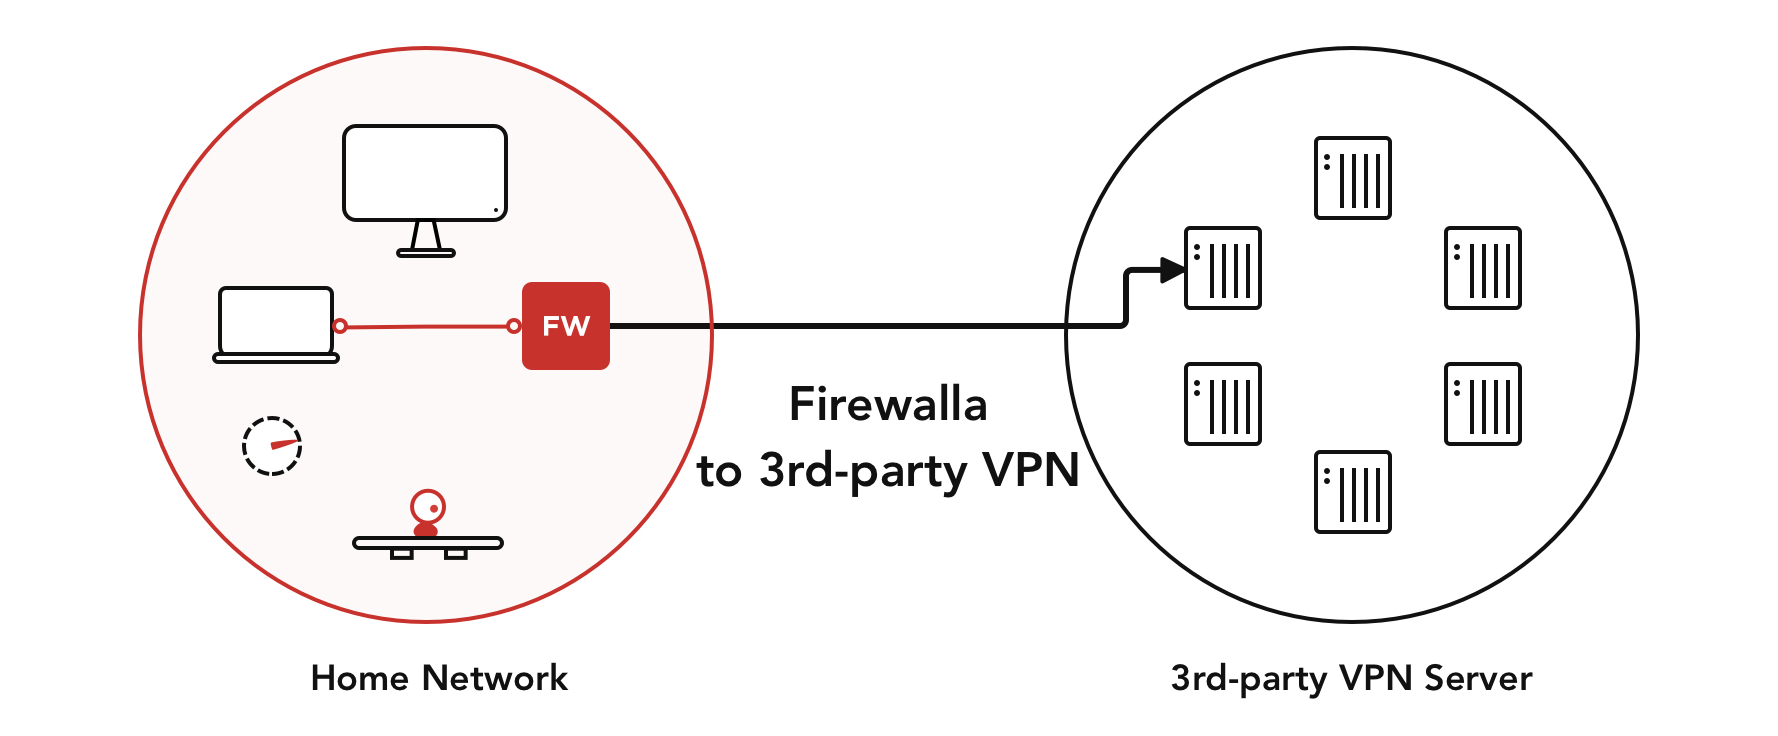 Diagram of 3rd Party VPN connection between a Home network and 3rd-party VPN server